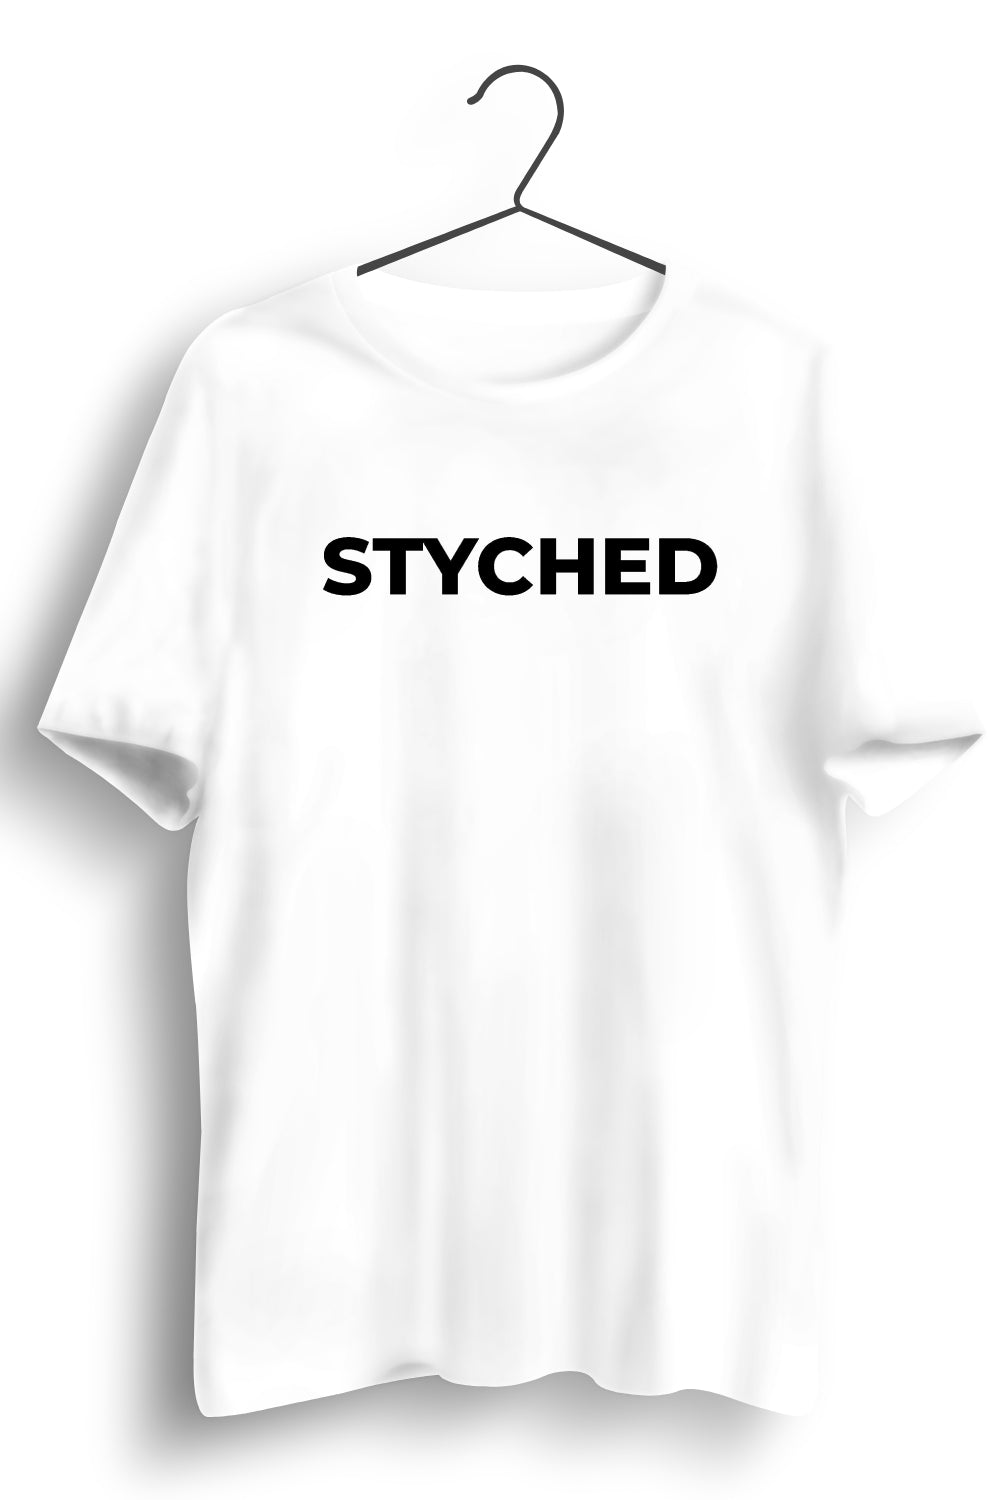 Styched Font White Tshirt